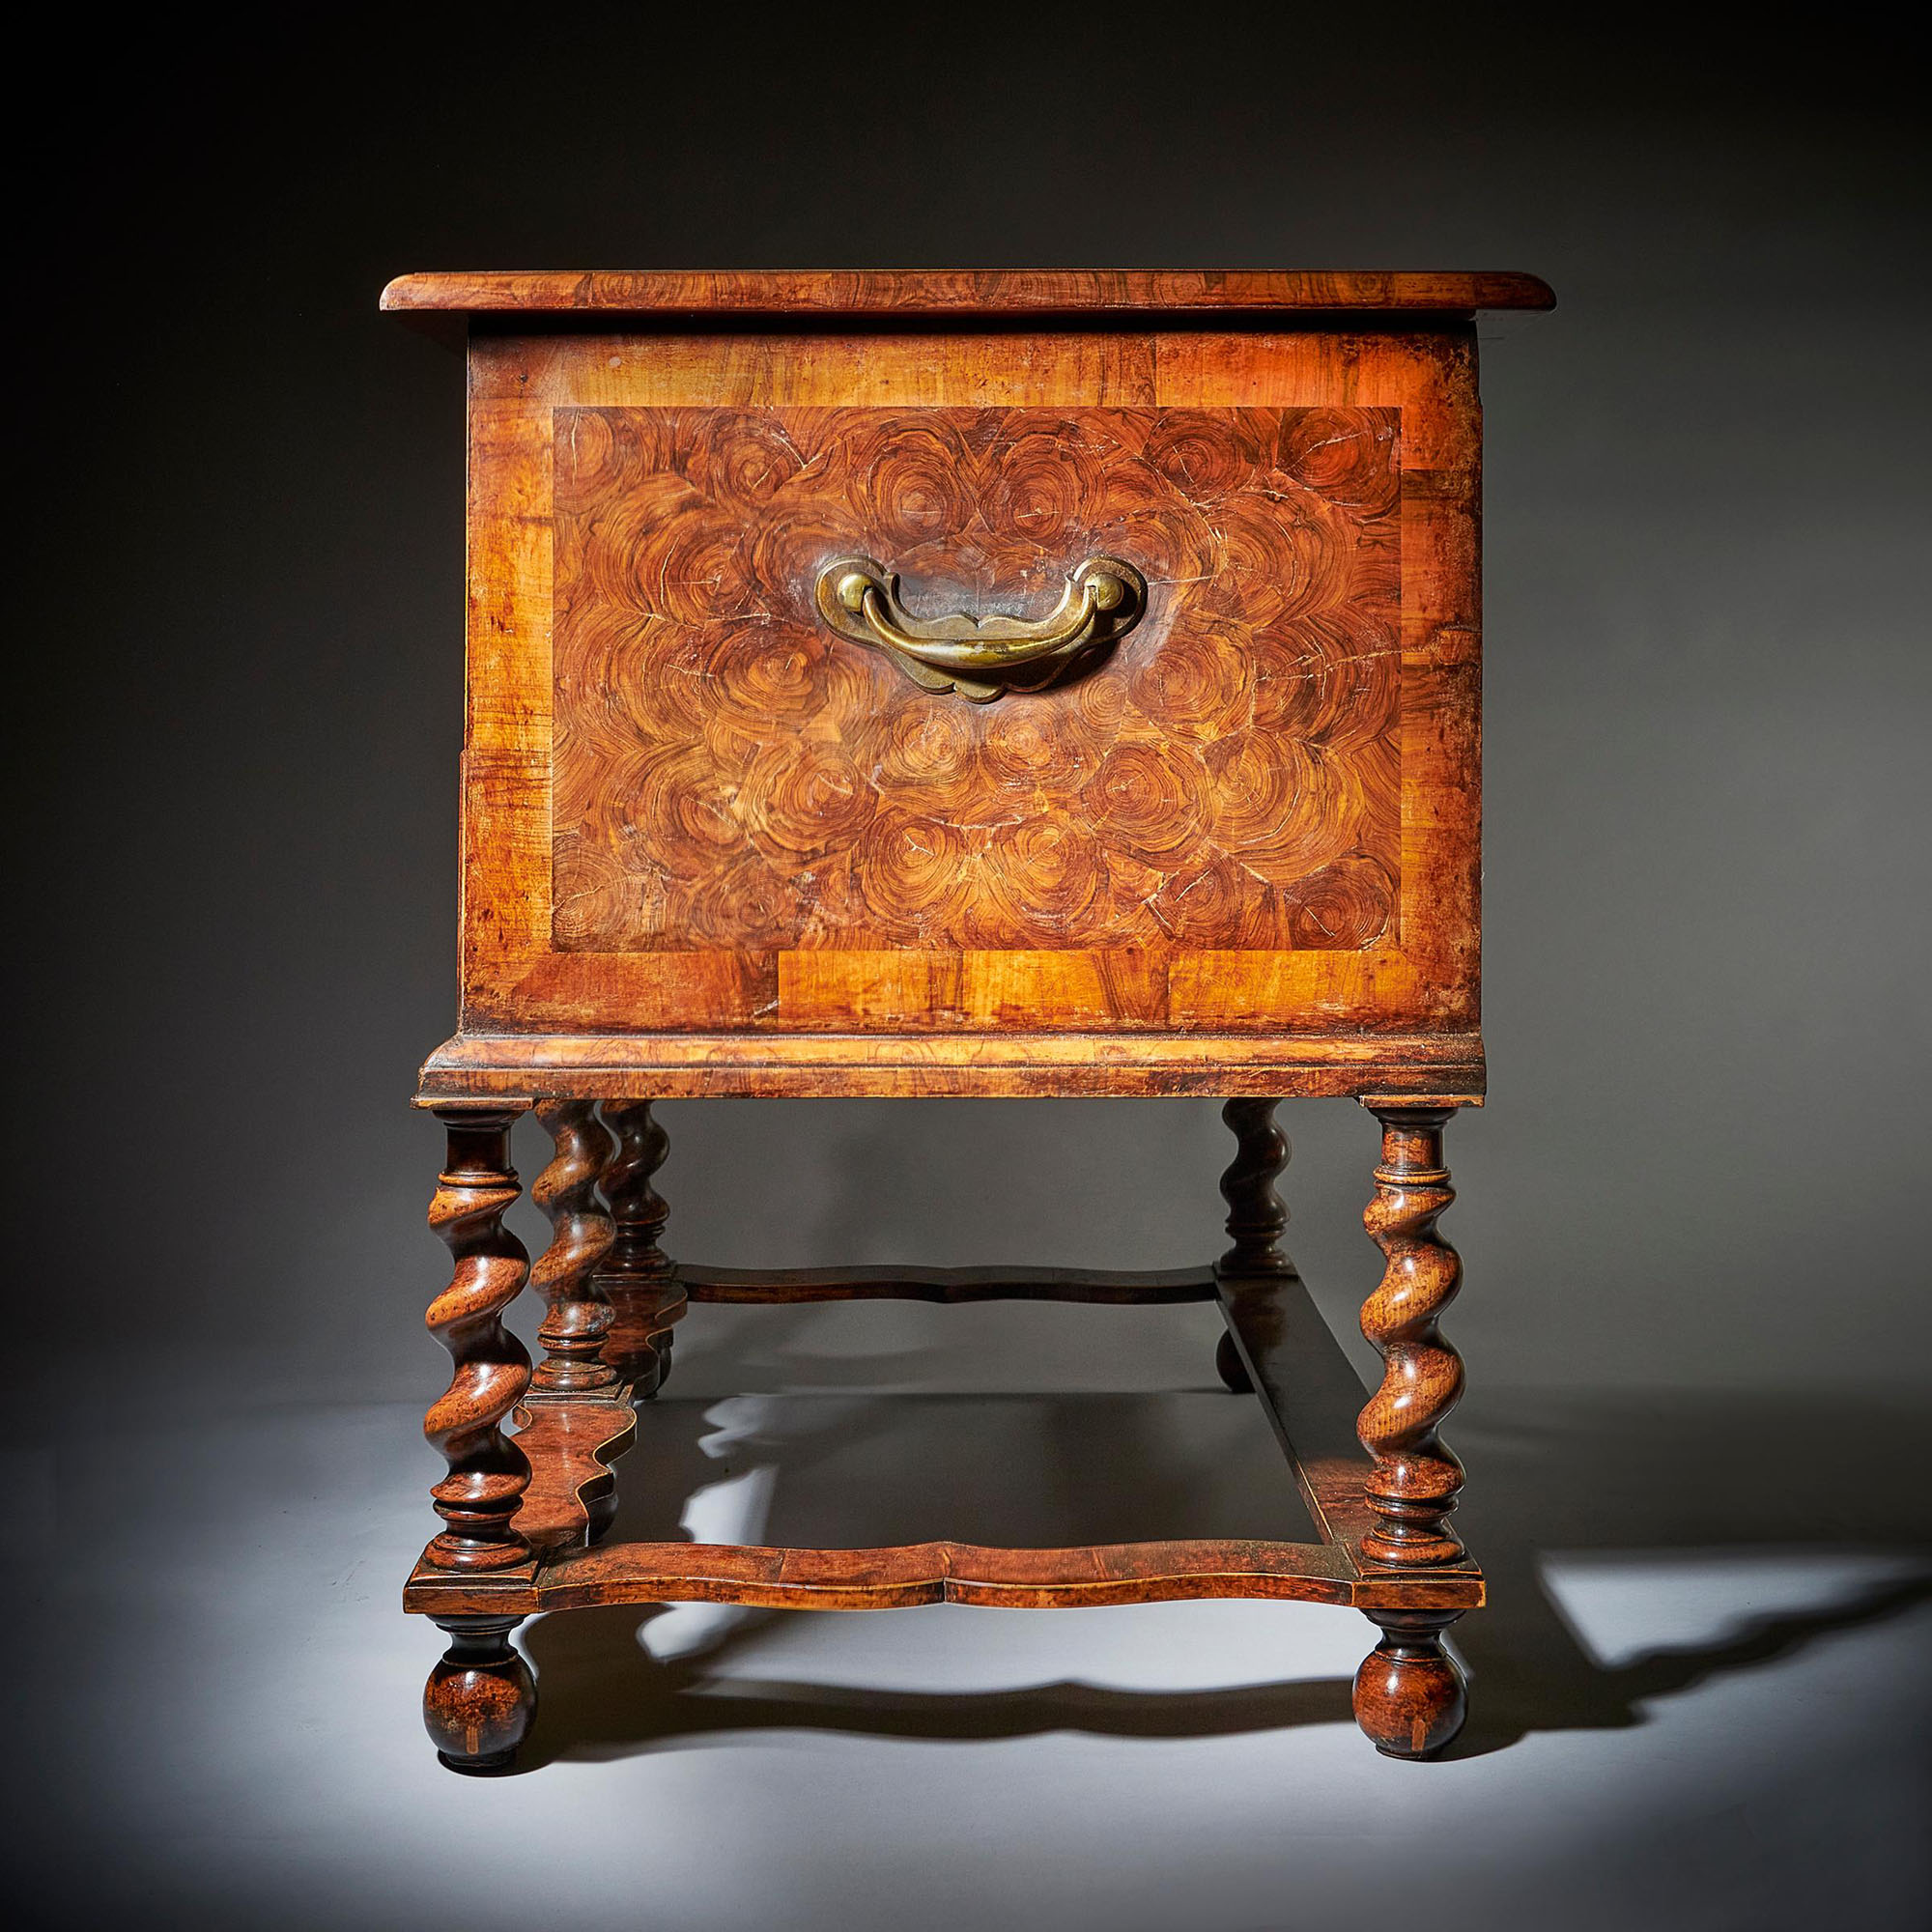 A fine and extremely rare 17th century William and Mary baroque olive oyster chest on stand or 'table box', circa 1675-1690. 18